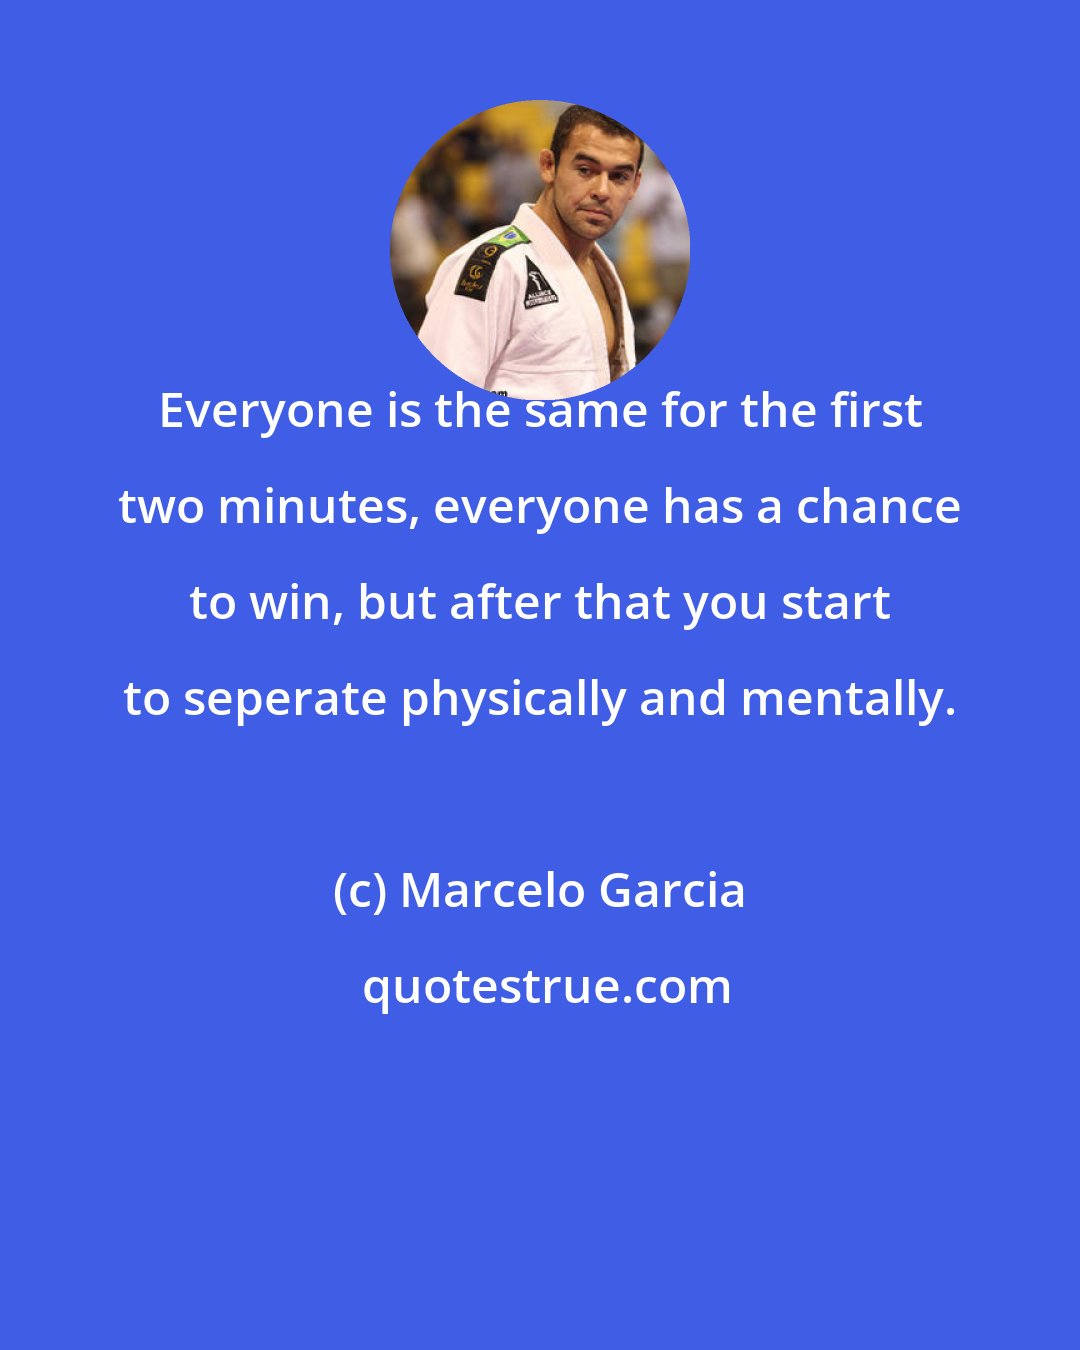 Marcelo Garcia: Everyone is the same for the first two minutes, everyone has a chance to win, but after that you start to seperate physically and mentally.